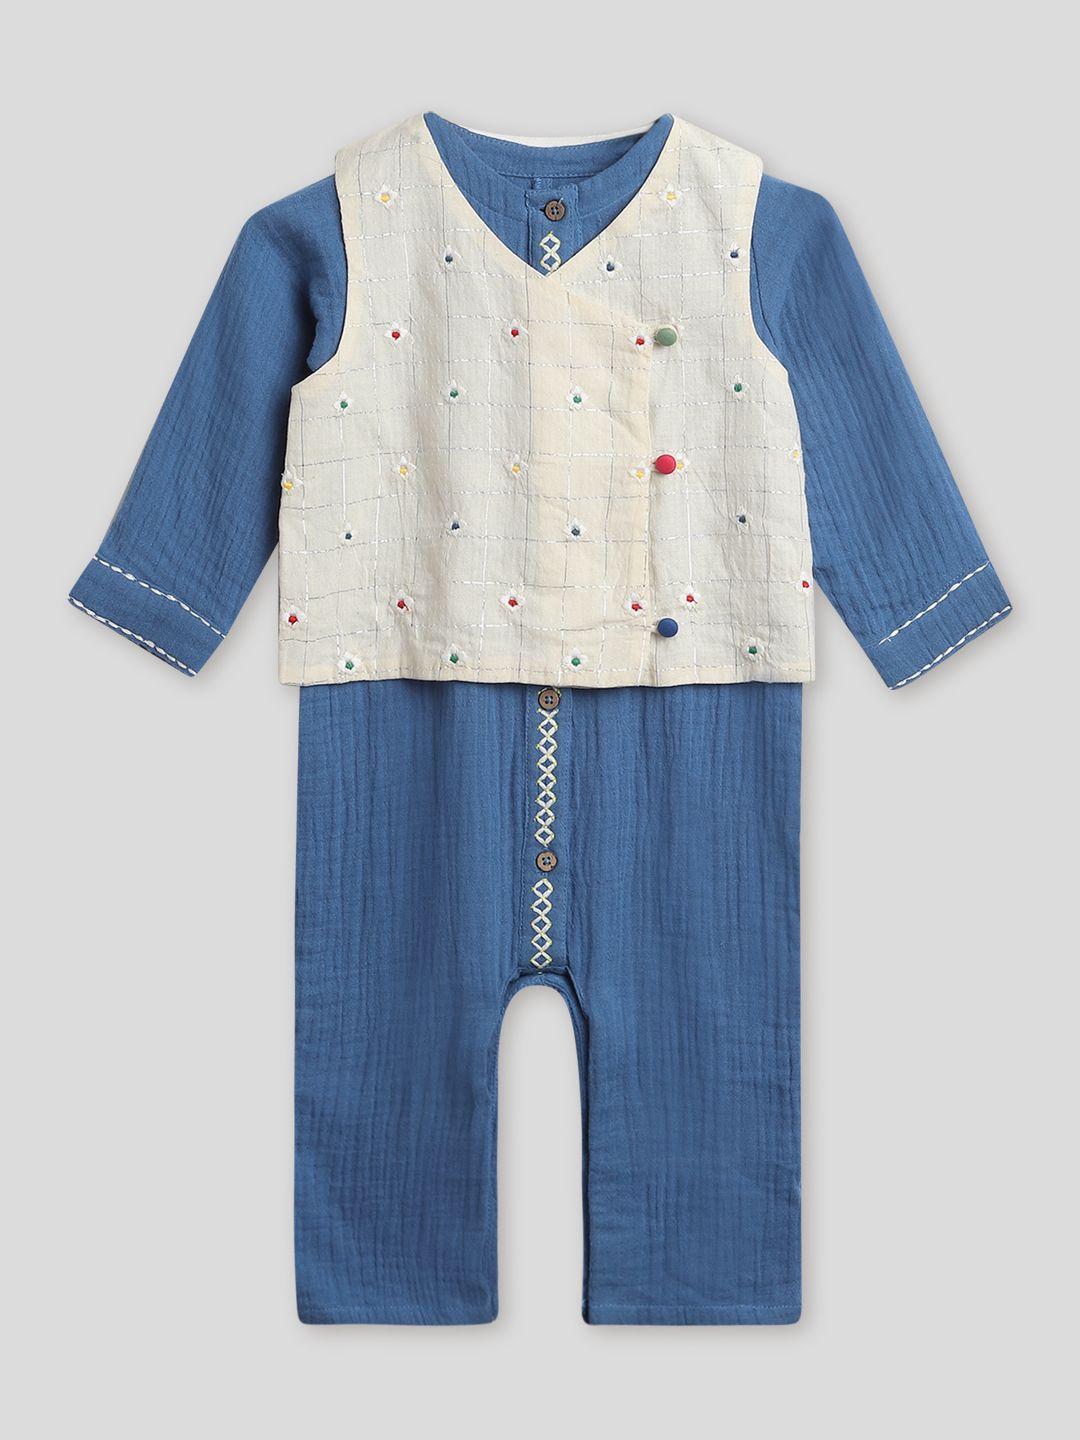 somersault-infants-boys-pure-cotton-romper-with-jacket